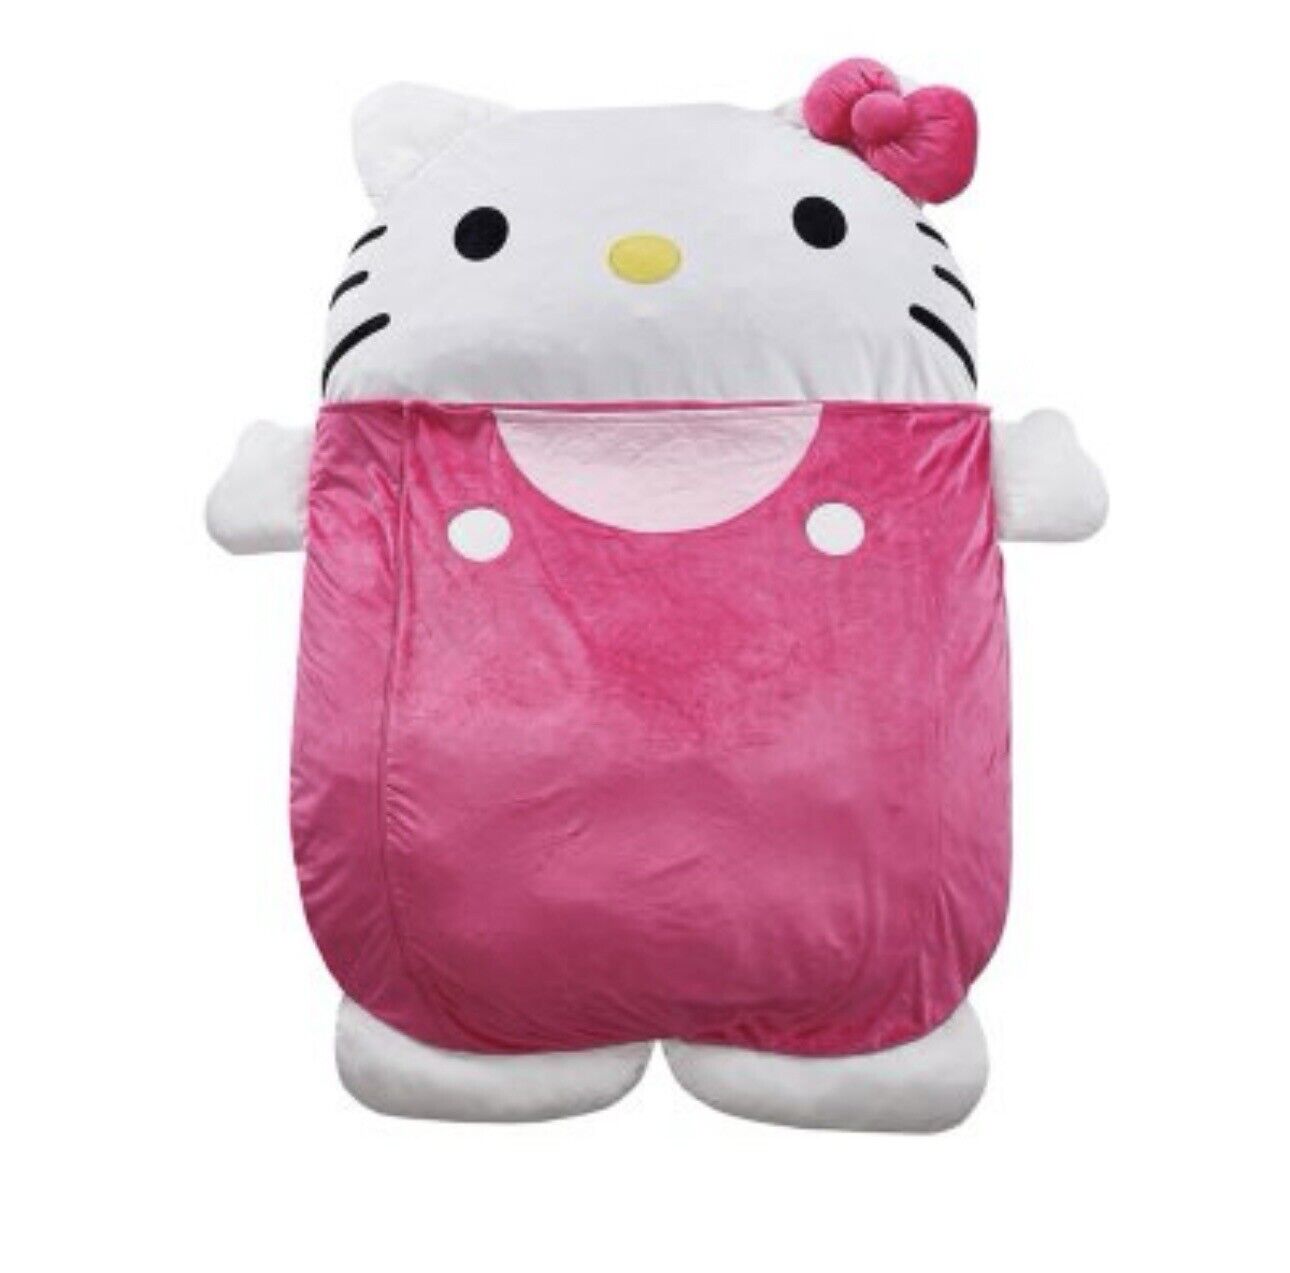 Hello Kitty Sanrio Super Soft 2 IN 1 Lounger Nap Mat Sleeping Bag NEW In Box.